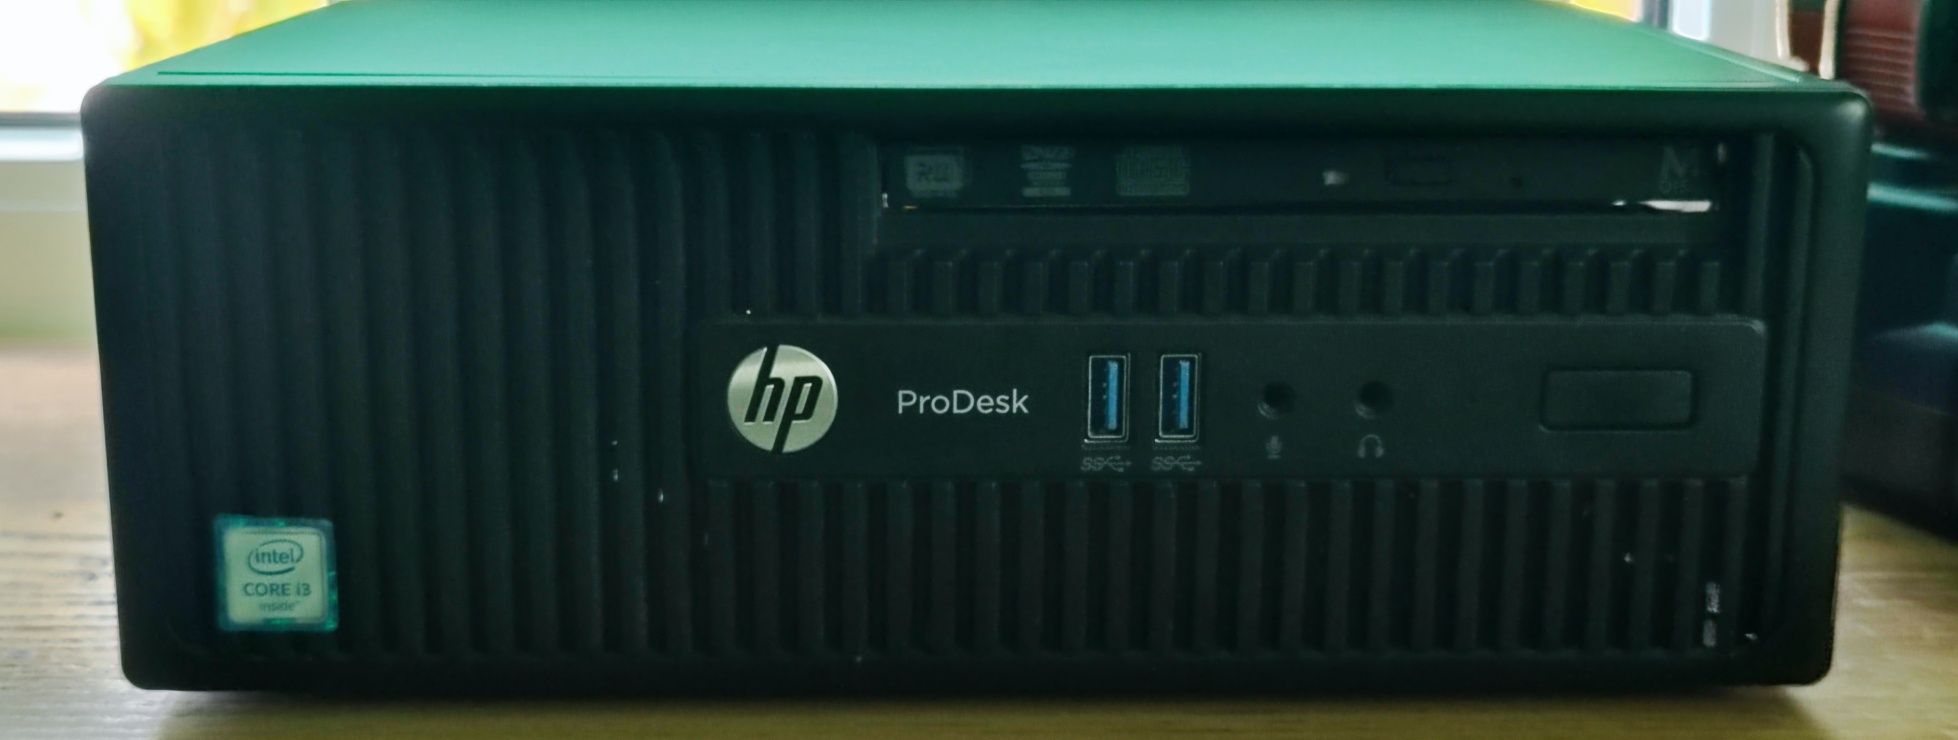 HP Prodesk 400 G3 Sff business pc